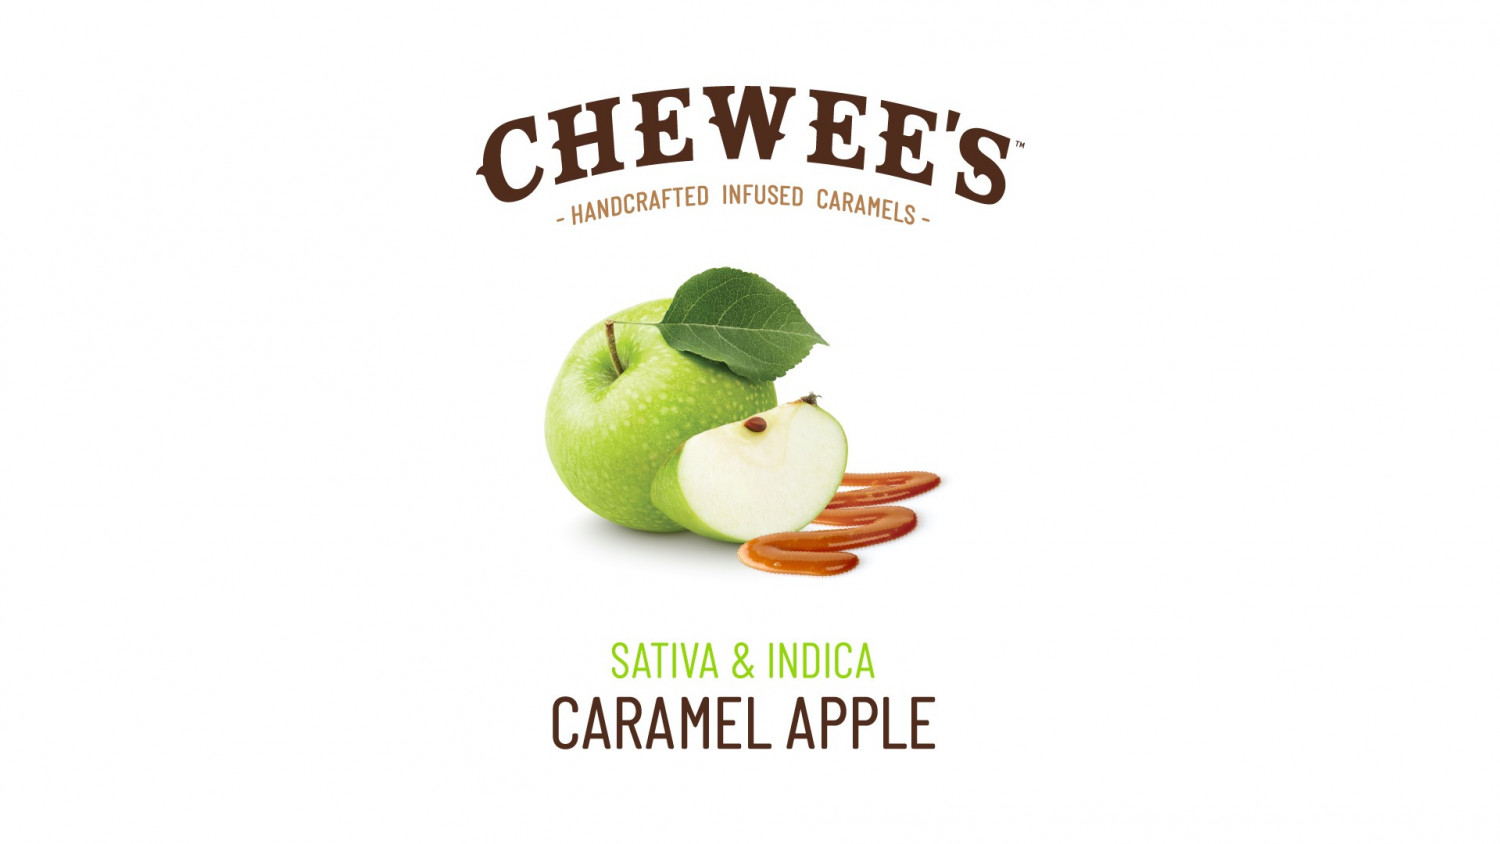 Sativa Caramel Apple Chewee's By 4Front Infuse THC With Timeless Simplicity 